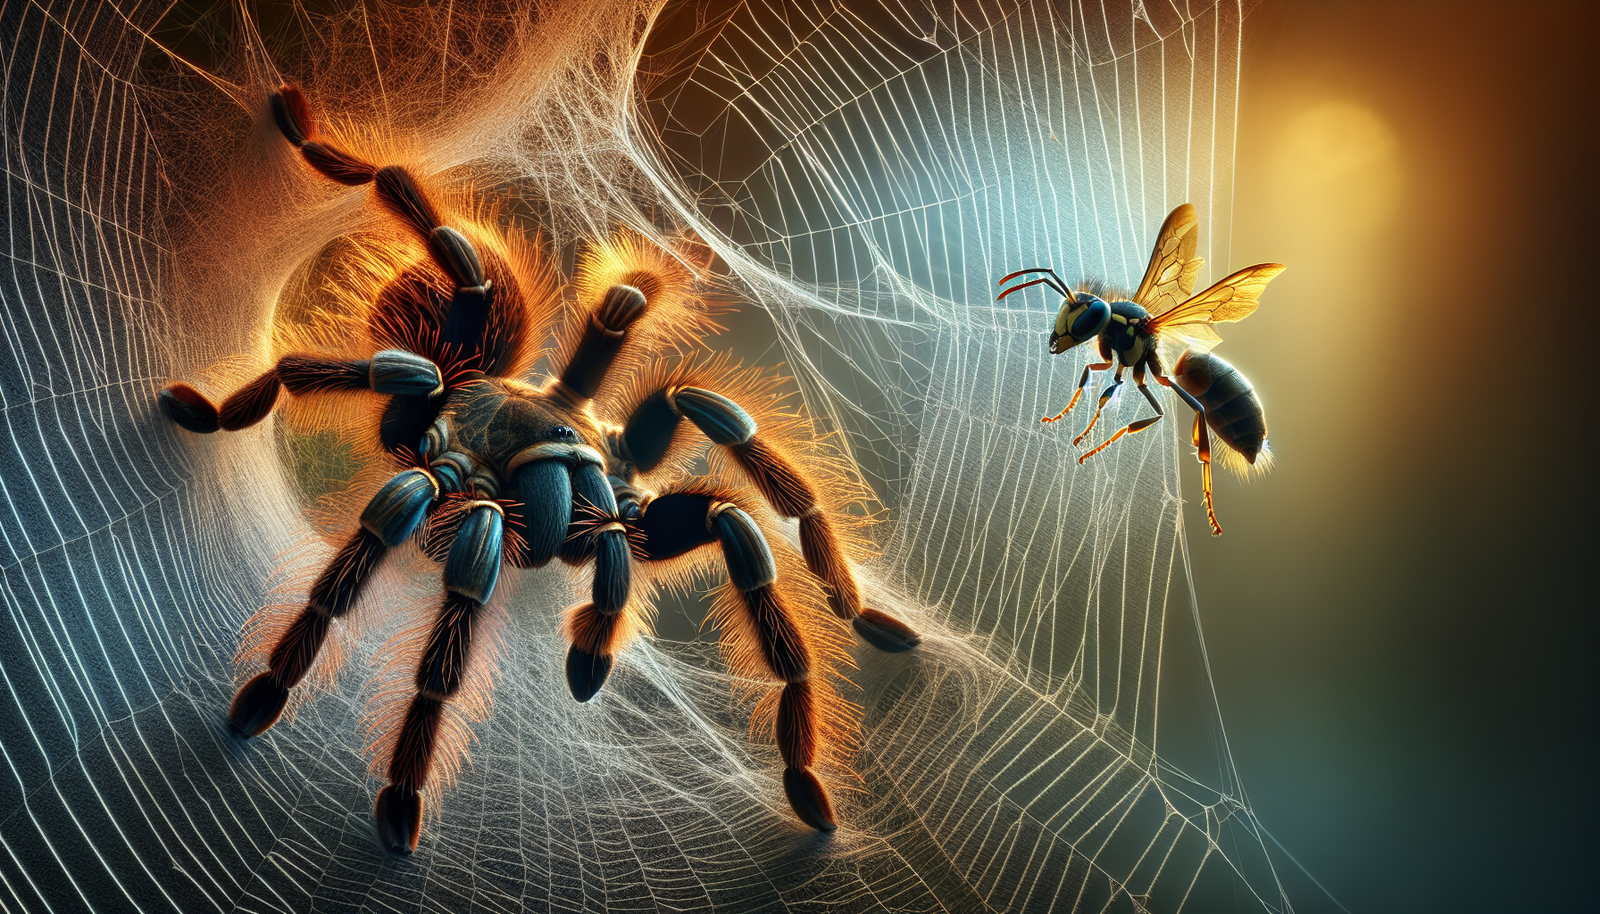 Are There Any Known Cases Of Tarantulas Falling Prey To Parasitic Wasps?